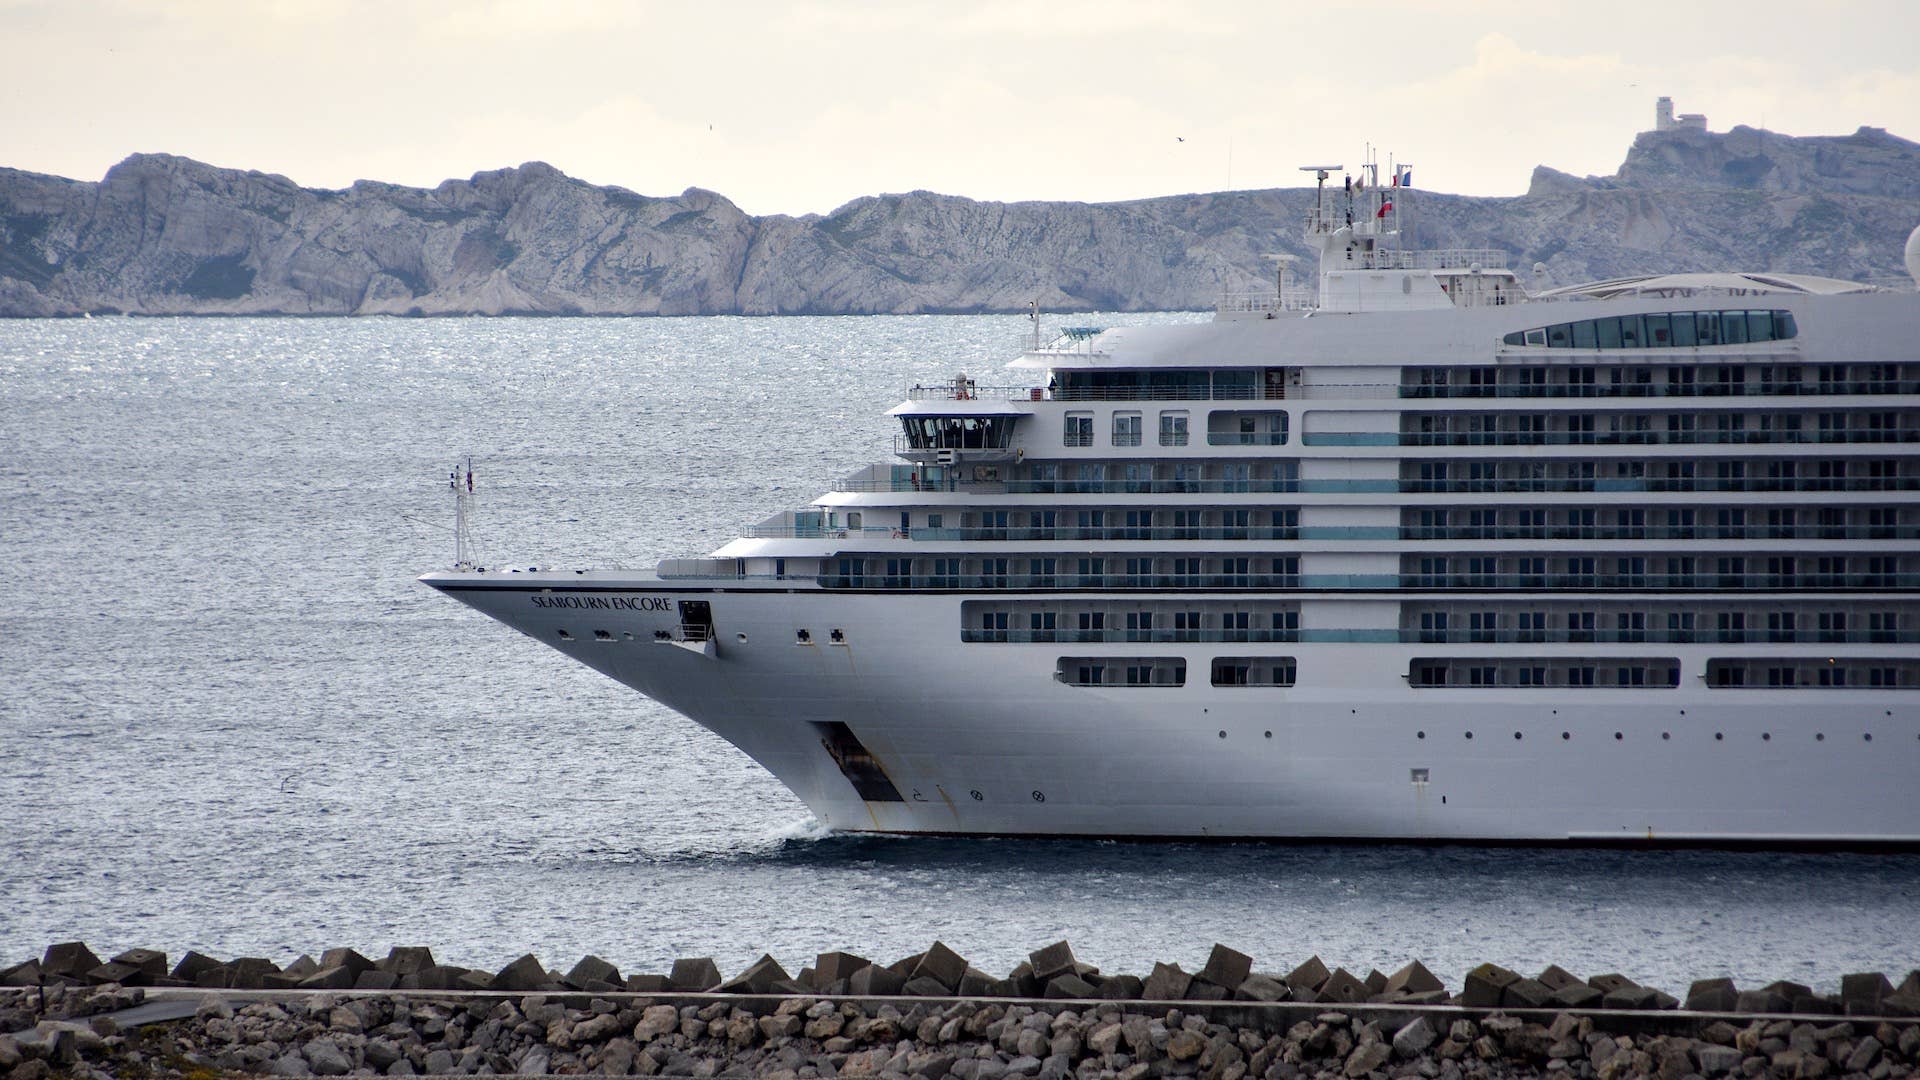 The liner Seabourn Encore cruise ship arrives in the French Mediterranean port of Marseille